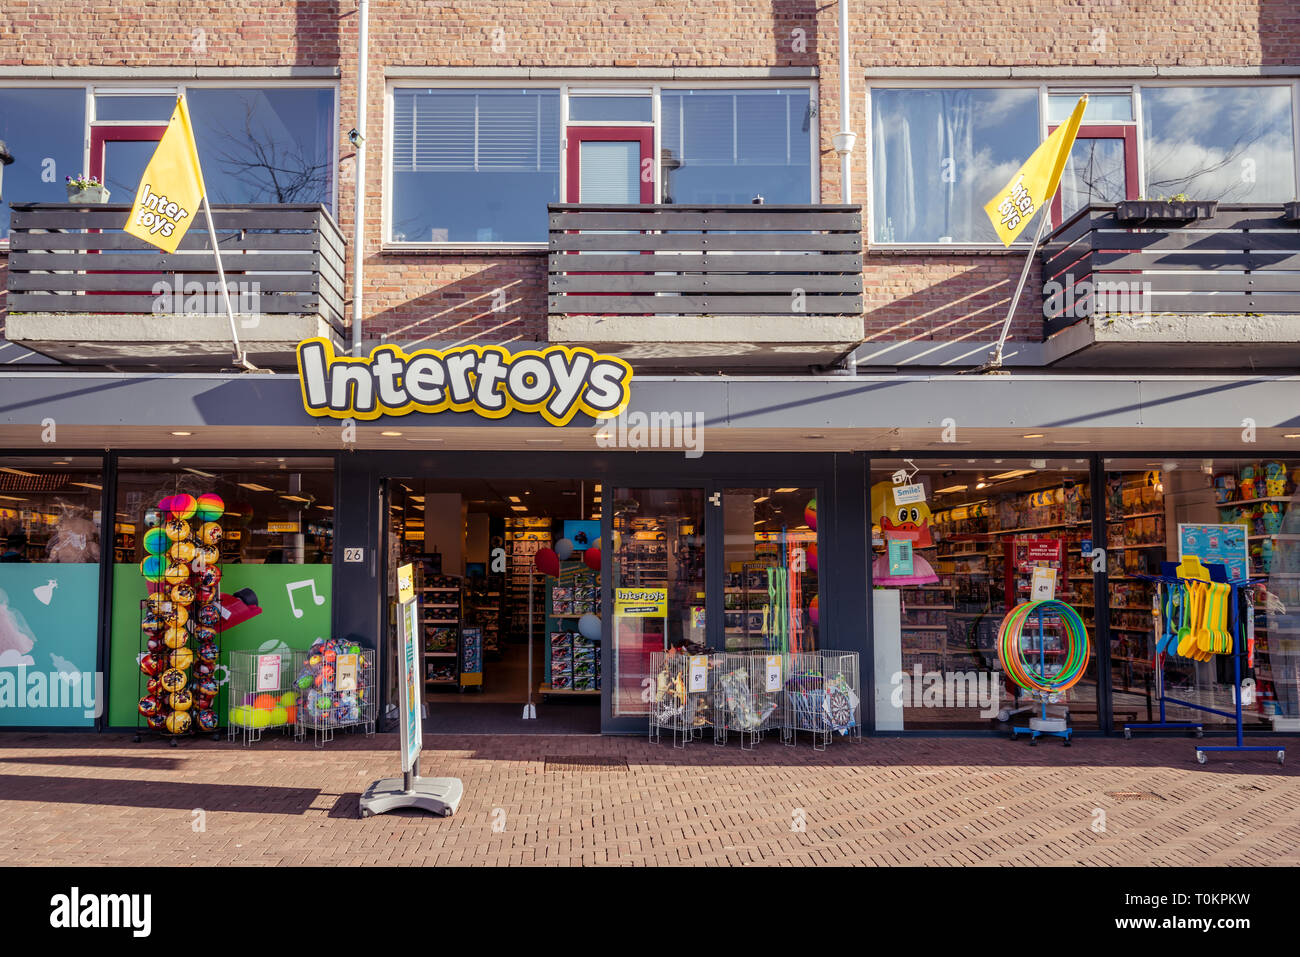 Large storefront sign stock and images - Alamy